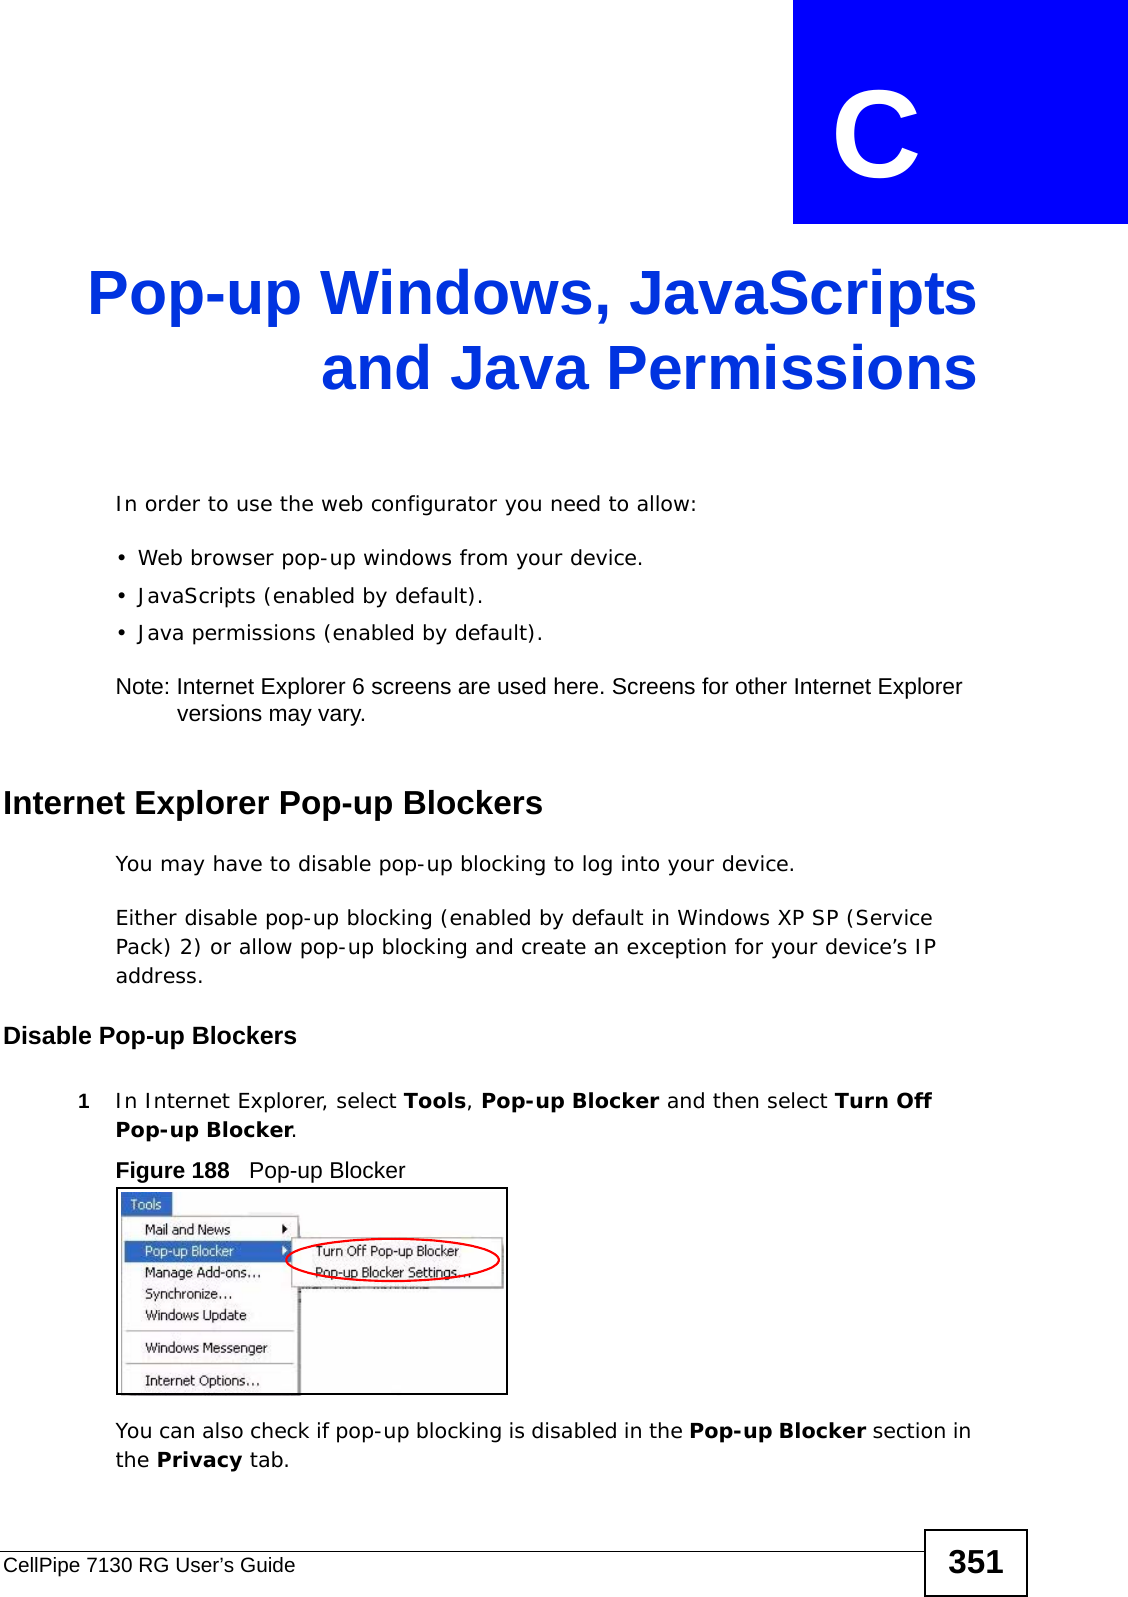 CellPipe 7130 RG User’s Guide 351APPENDIX  C Pop-up Windows, JavaScriptsand Java PermissionsIn order to use the web configurator you need to allow:• Web browser pop-up windows from your device.• JavaScripts (enabled by default).• Java permissions (enabled by default).Note: Internet Explorer 6 screens are used here. Screens for other Internet Explorer versions may vary.Internet Explorer Pop-up BlockersYou may have to disable pop-up blocking to log into your device. Either disable pop-up blocking (enabled by default in Windows XP SP (Service Pack) 2) or allow pop-up blocking and create an exception for your device’s IP address.Disable Pop-up Blockers1In Internet Explorer, select Tools, Pop-up Blocker and then select Turn Off Pop-up Blocker. Figure 188   Pop-up BlockerYou can also check if pop-up blocking is disabled in the Pop-up Blocker section in the Privacy tab. 